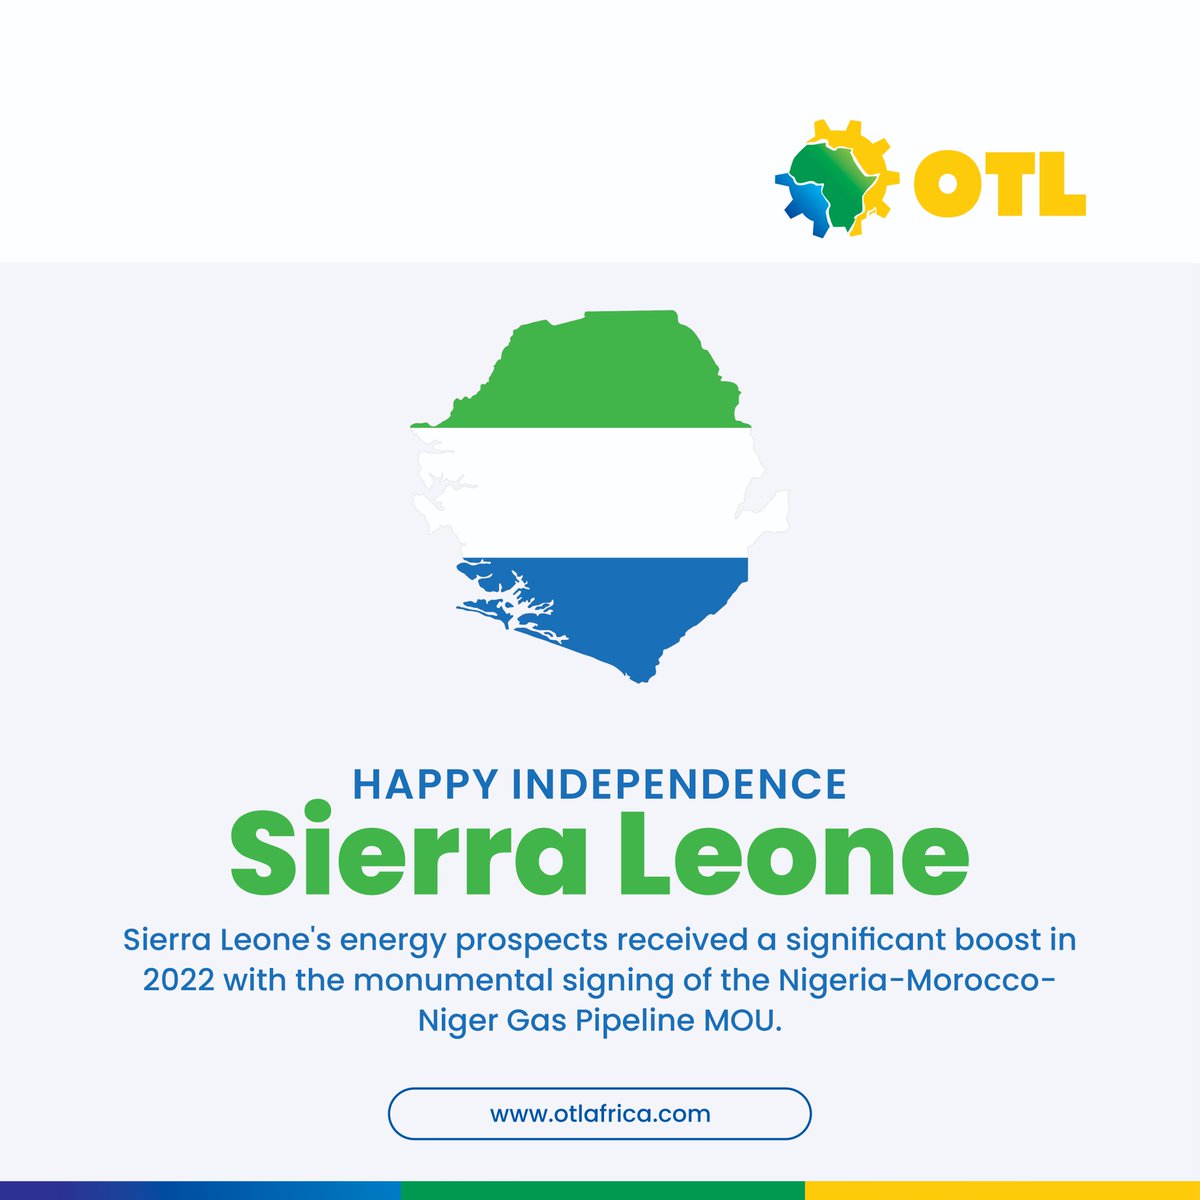 We wish a very Happy Independence to the entire Downstream Energy Community of Sierra Leone.

#conference #OilGasandEnergy
#downstream #midstream #independence #africaenergy #otlafrica #SierraLeone #sierraleoneindependenceday 

@SierraLeoneUN @SierraLeoneHCUK